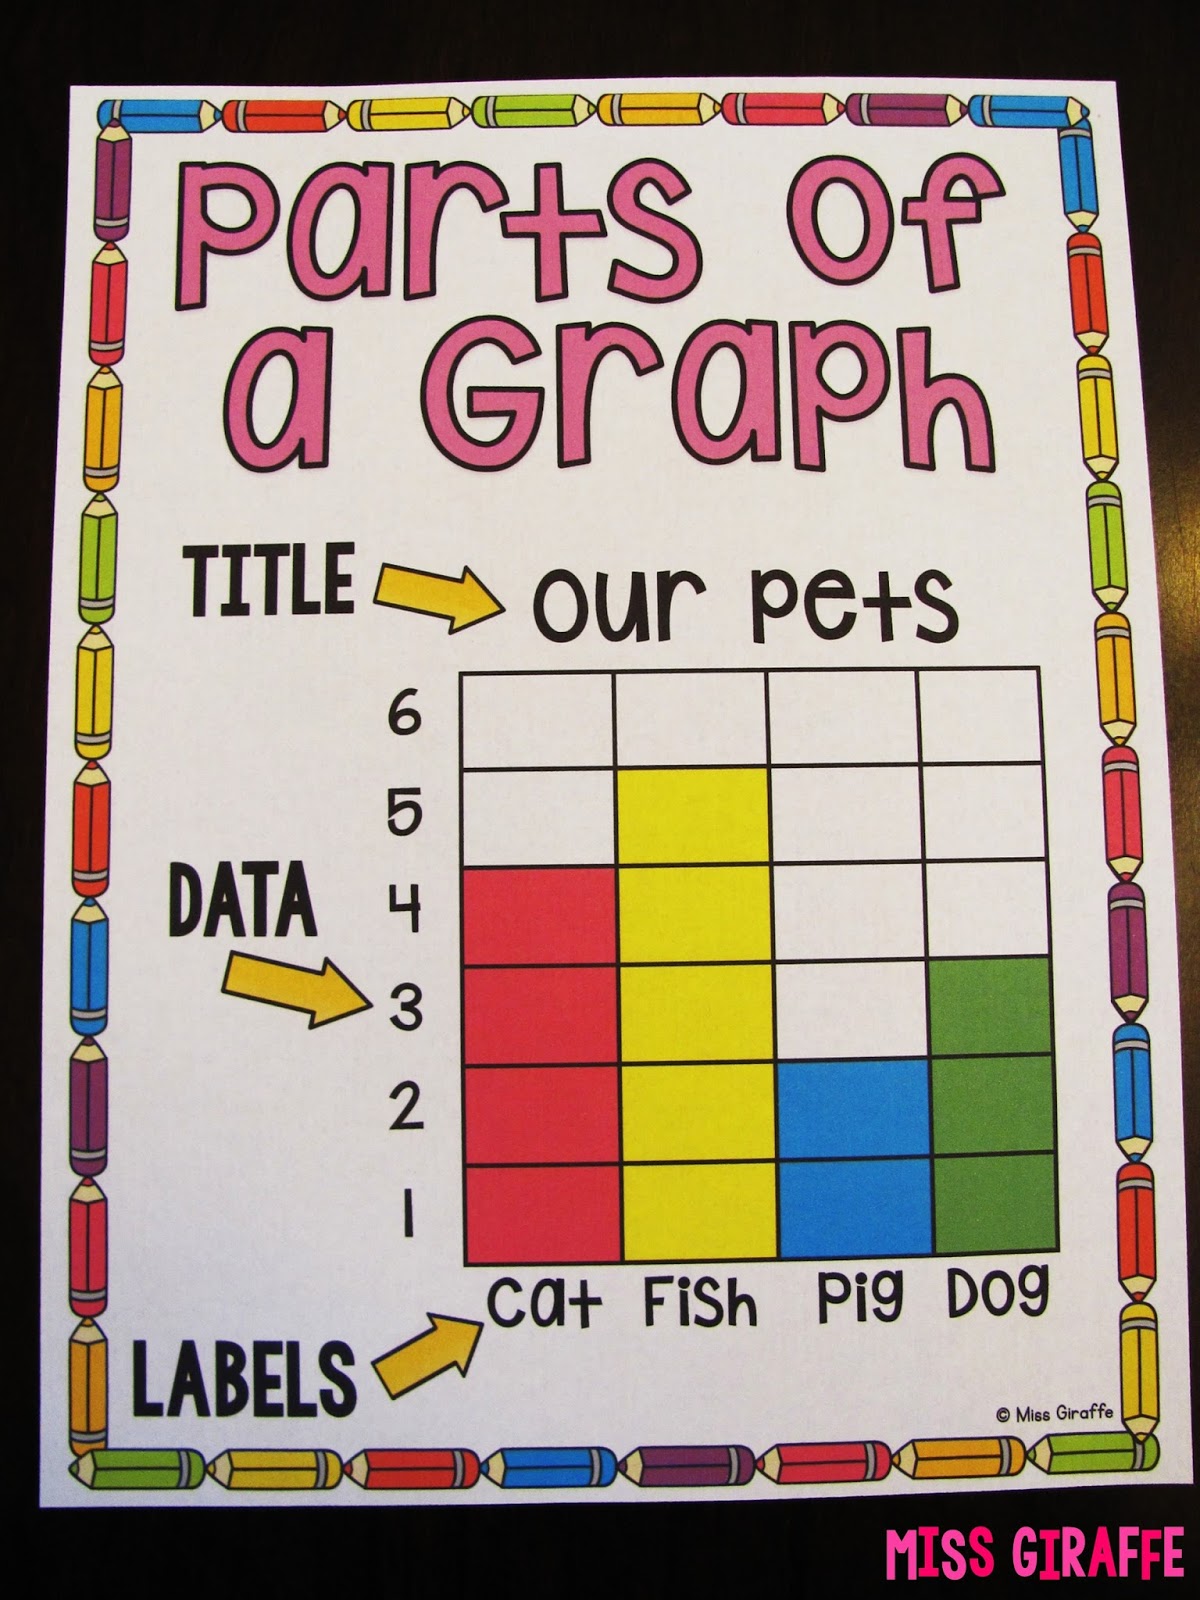 Miss Giraffe's Class: Graphing and Data Analysis in First Grade